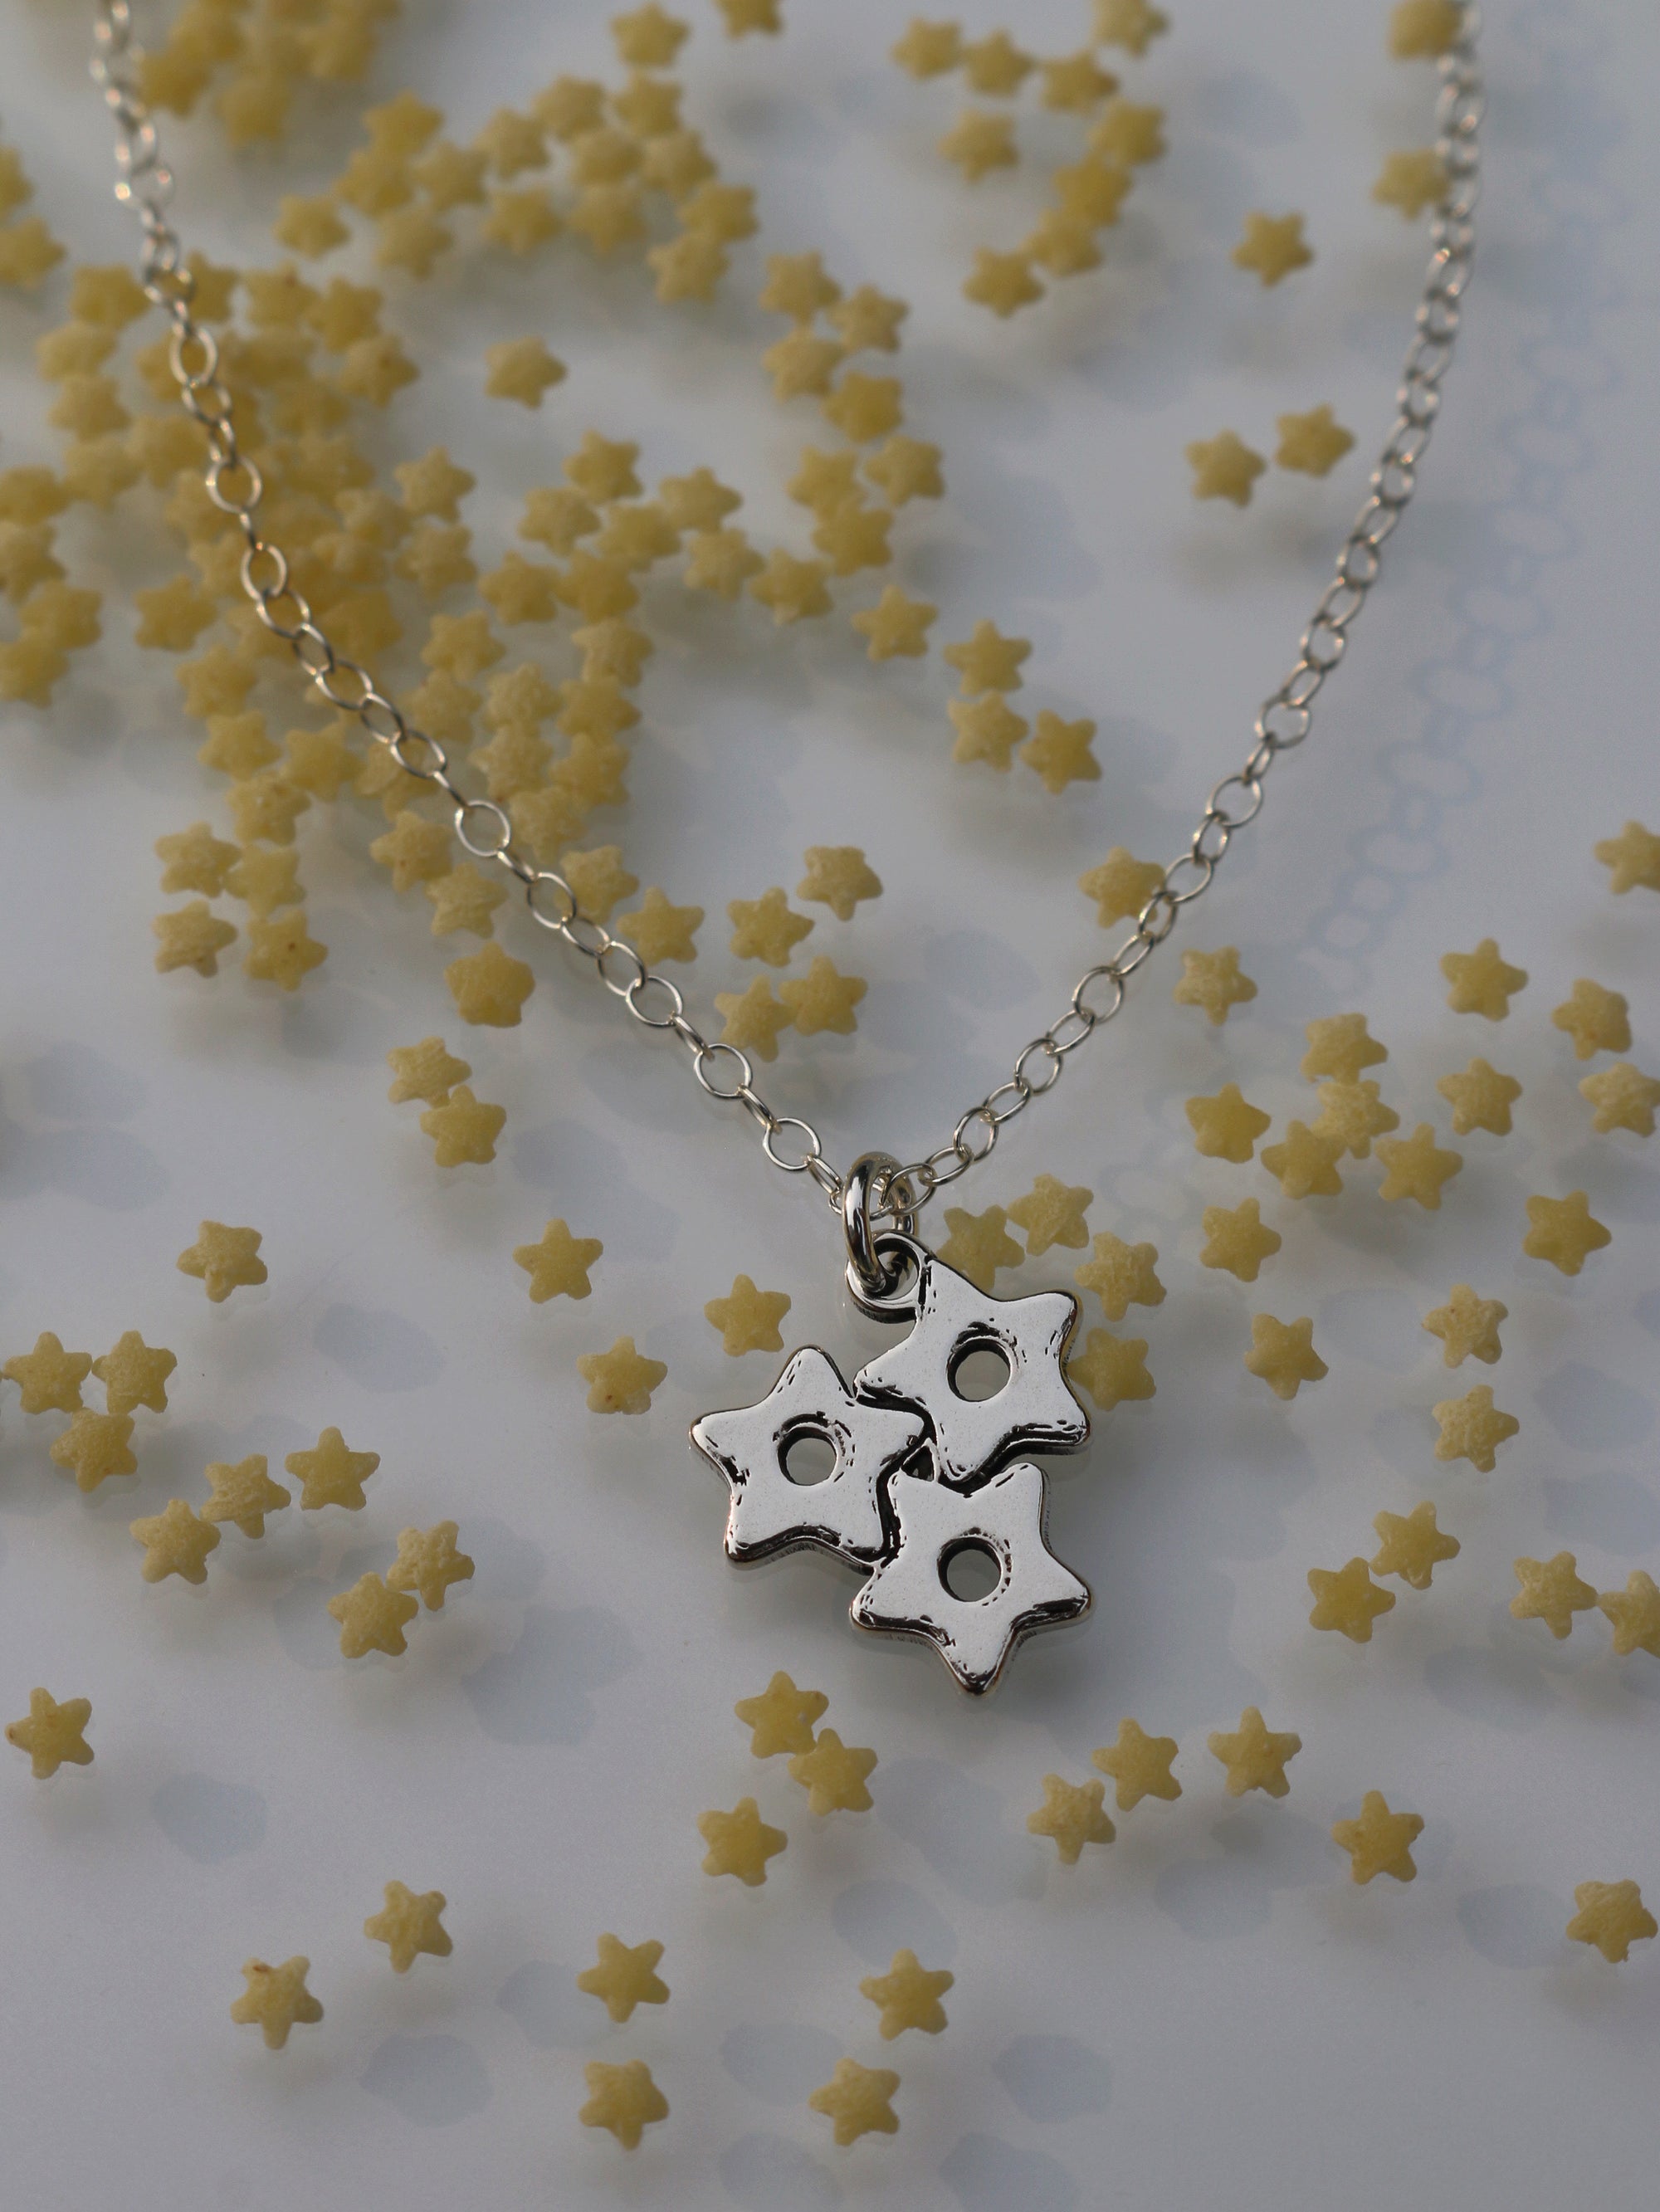 Star Pastina Pasta Necklace - Sterling Silver